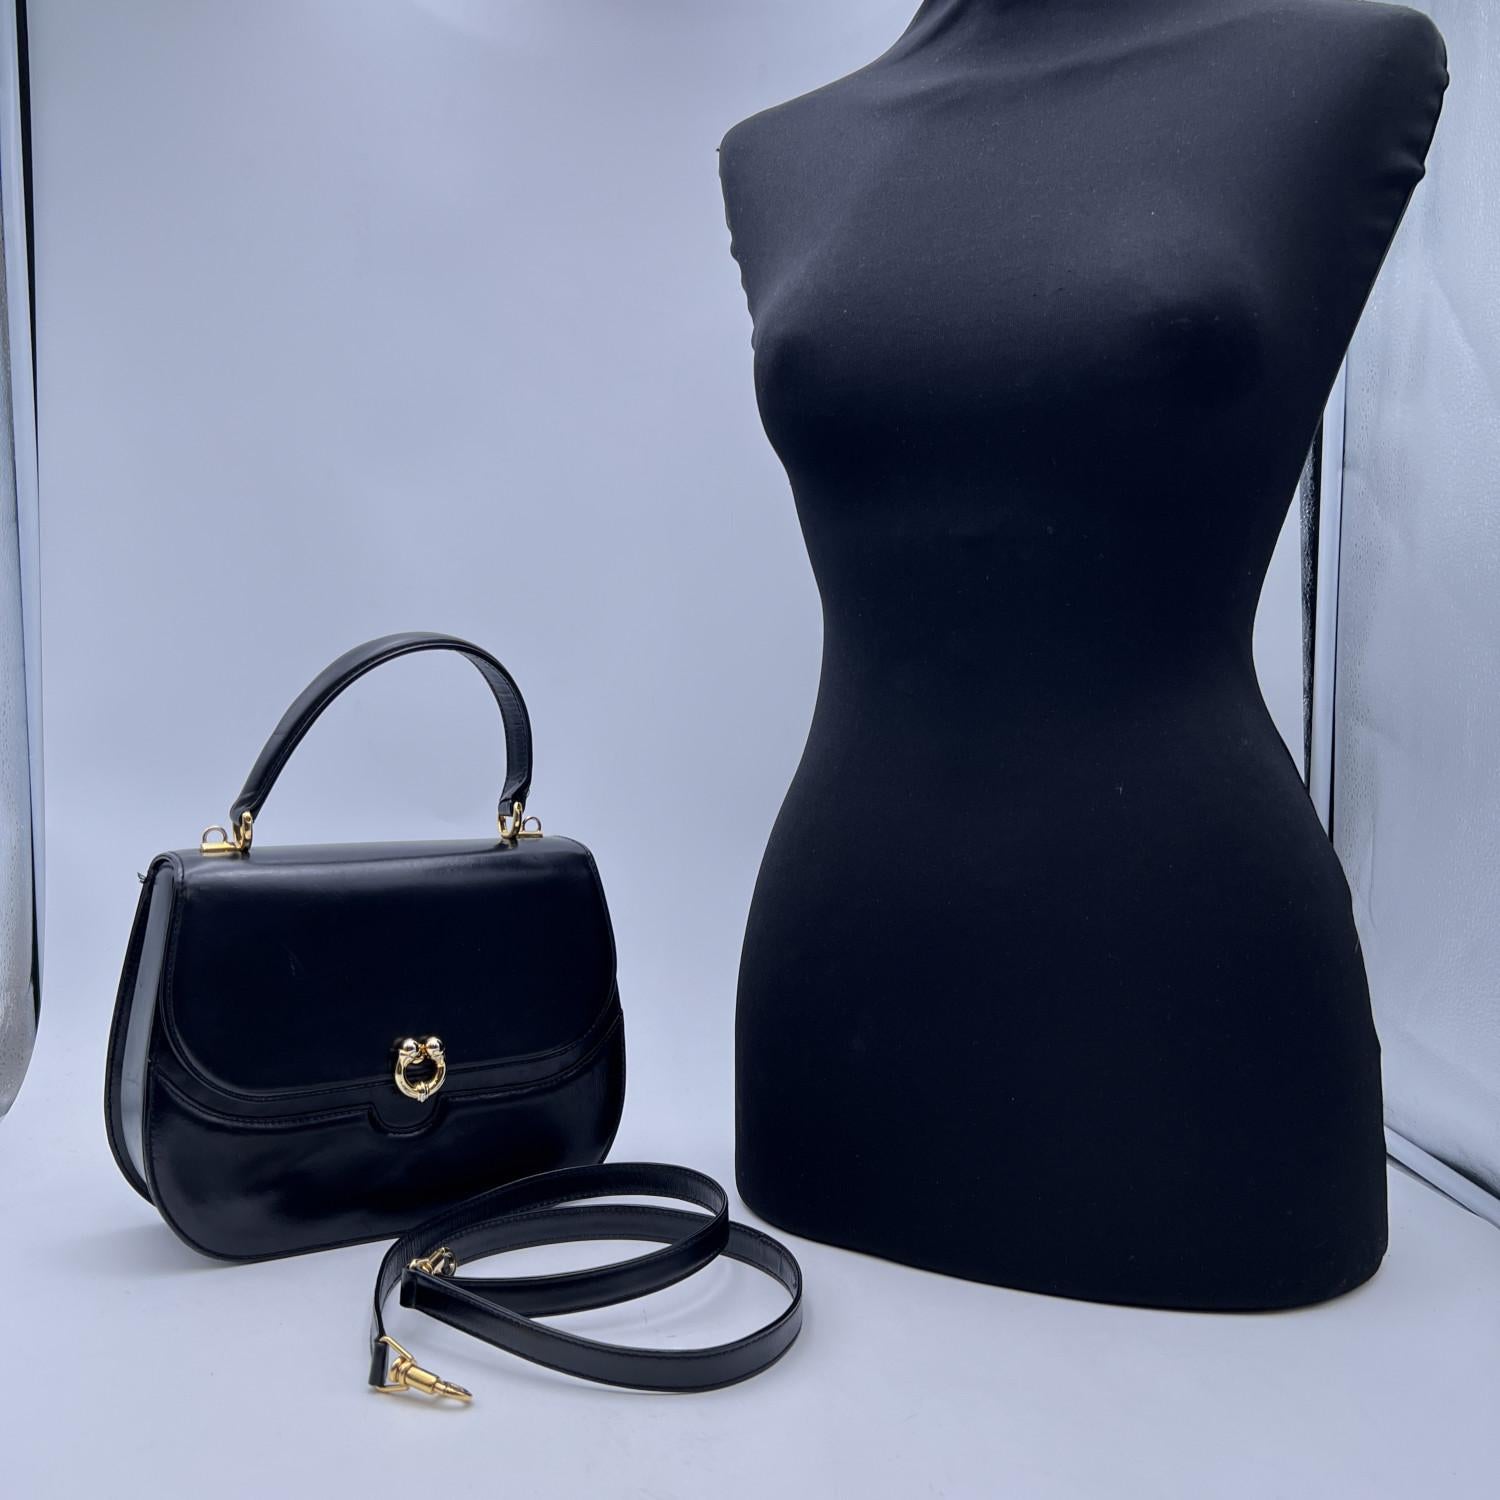 Gucci vintage handbag. Black leather. Flap with clasp closure. Gold metal shardware. Red leather lining. 2main sections and 1 side zip pocket and 1 side open pocket inside. Removable shoulder strap. 'Gucci - Made in Italy' embossed inside (with